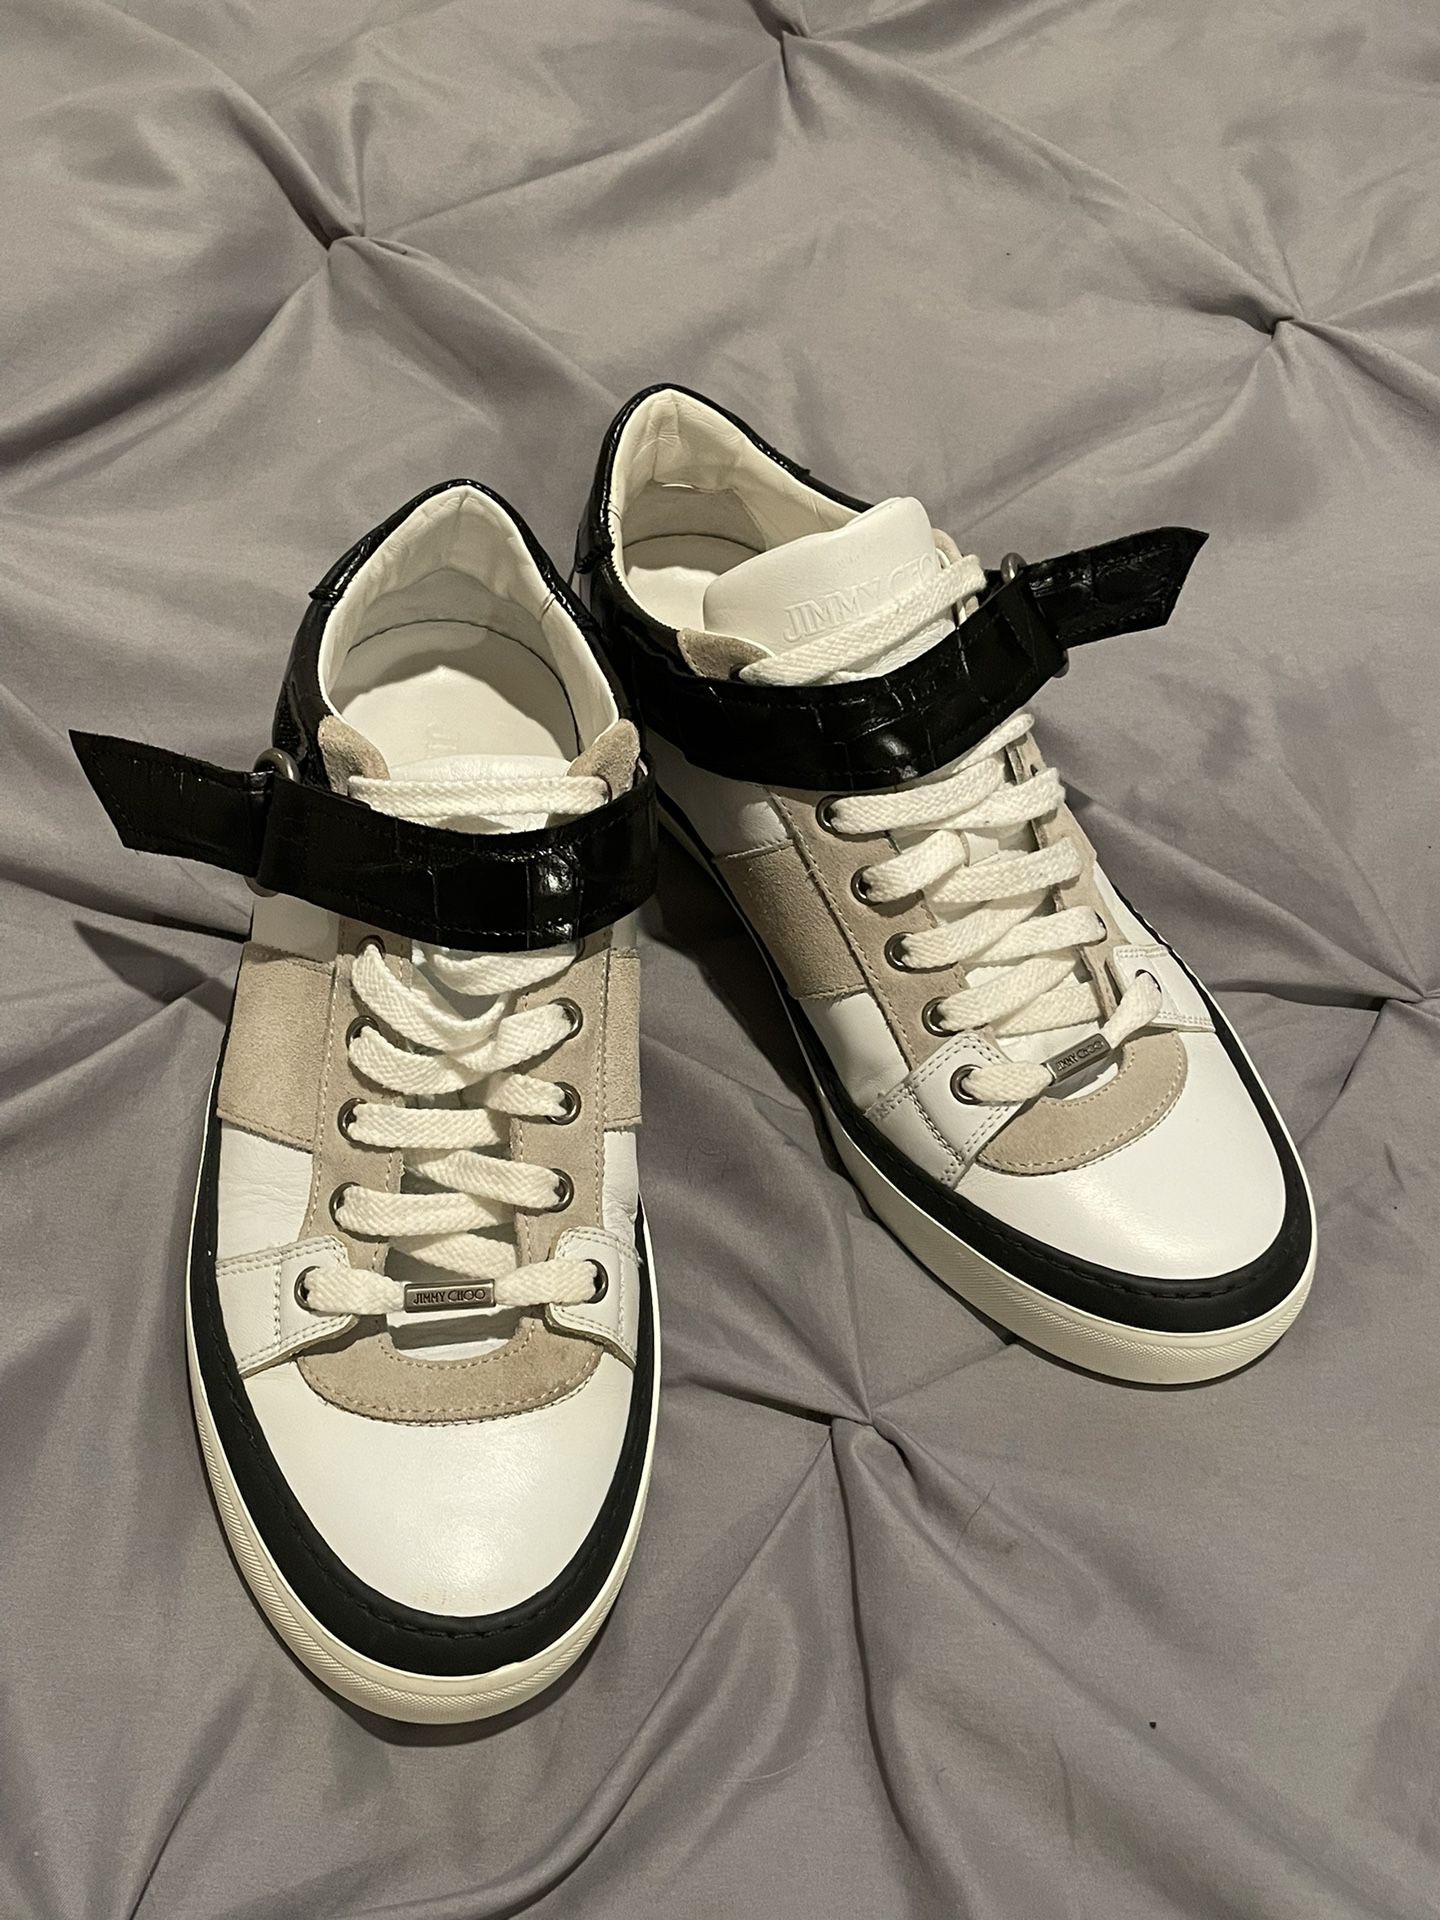 overdracht Discrimineren team Jimmy Choo Sneakers Size 9 Used Authentic for Sale in Queens, NY - OfferUp